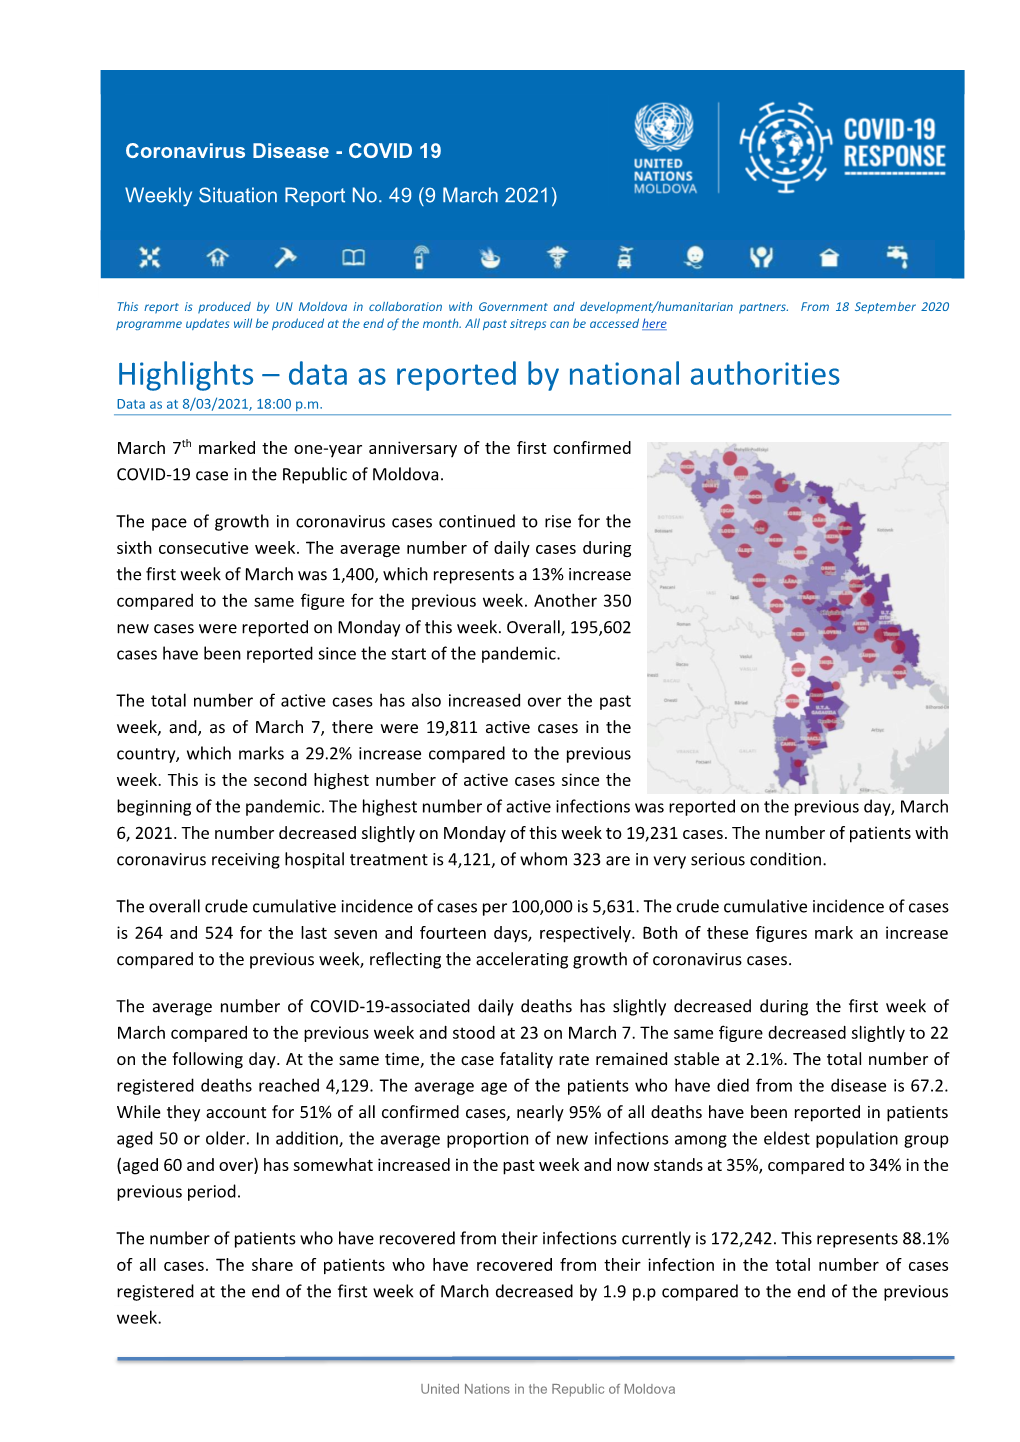 Highlights – Data As Reported by National Authorities Data As at 8/03/2021, 18:00 P.M